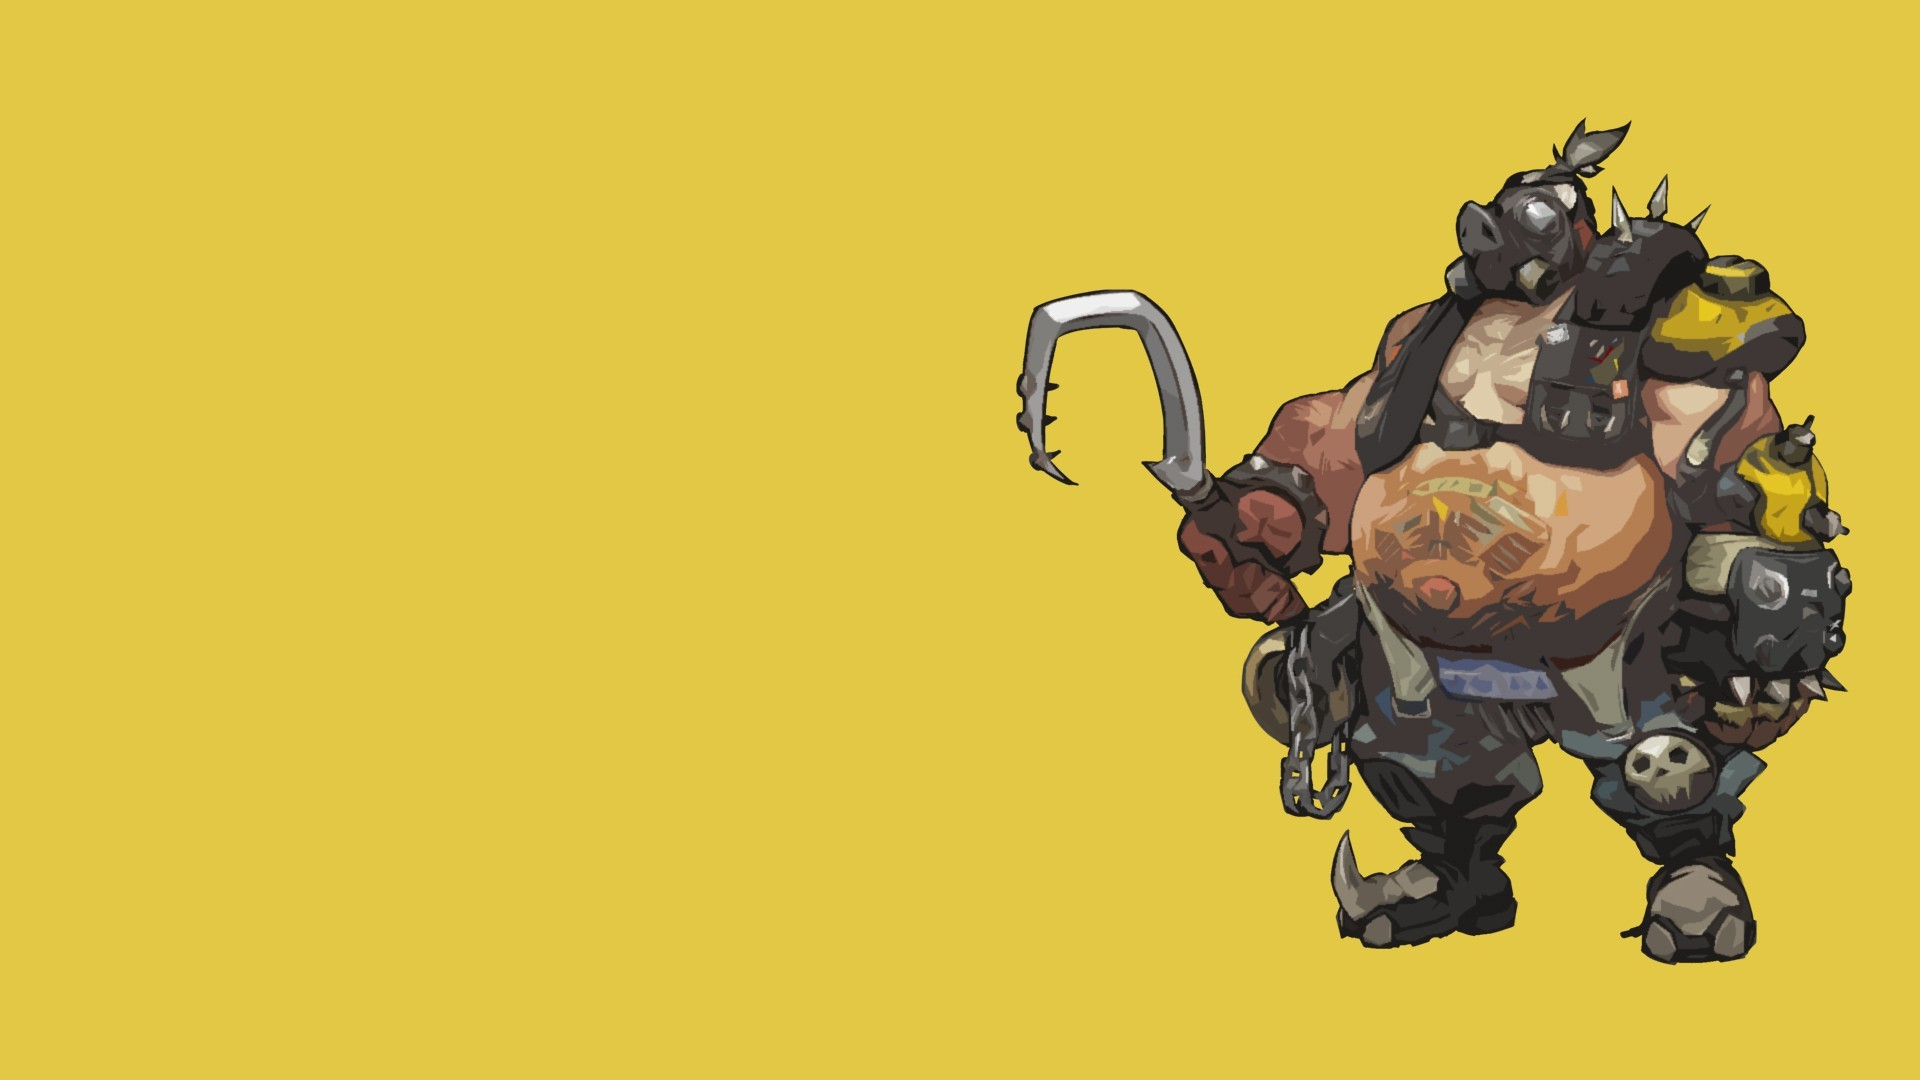 1920x1080 Wallpaper : px, Blizzard Entertainment, livewirehd Author, Mako Rutledge, Overwatch, Roadhog, video games wallpaperUp 1003212 HD Wallpapers